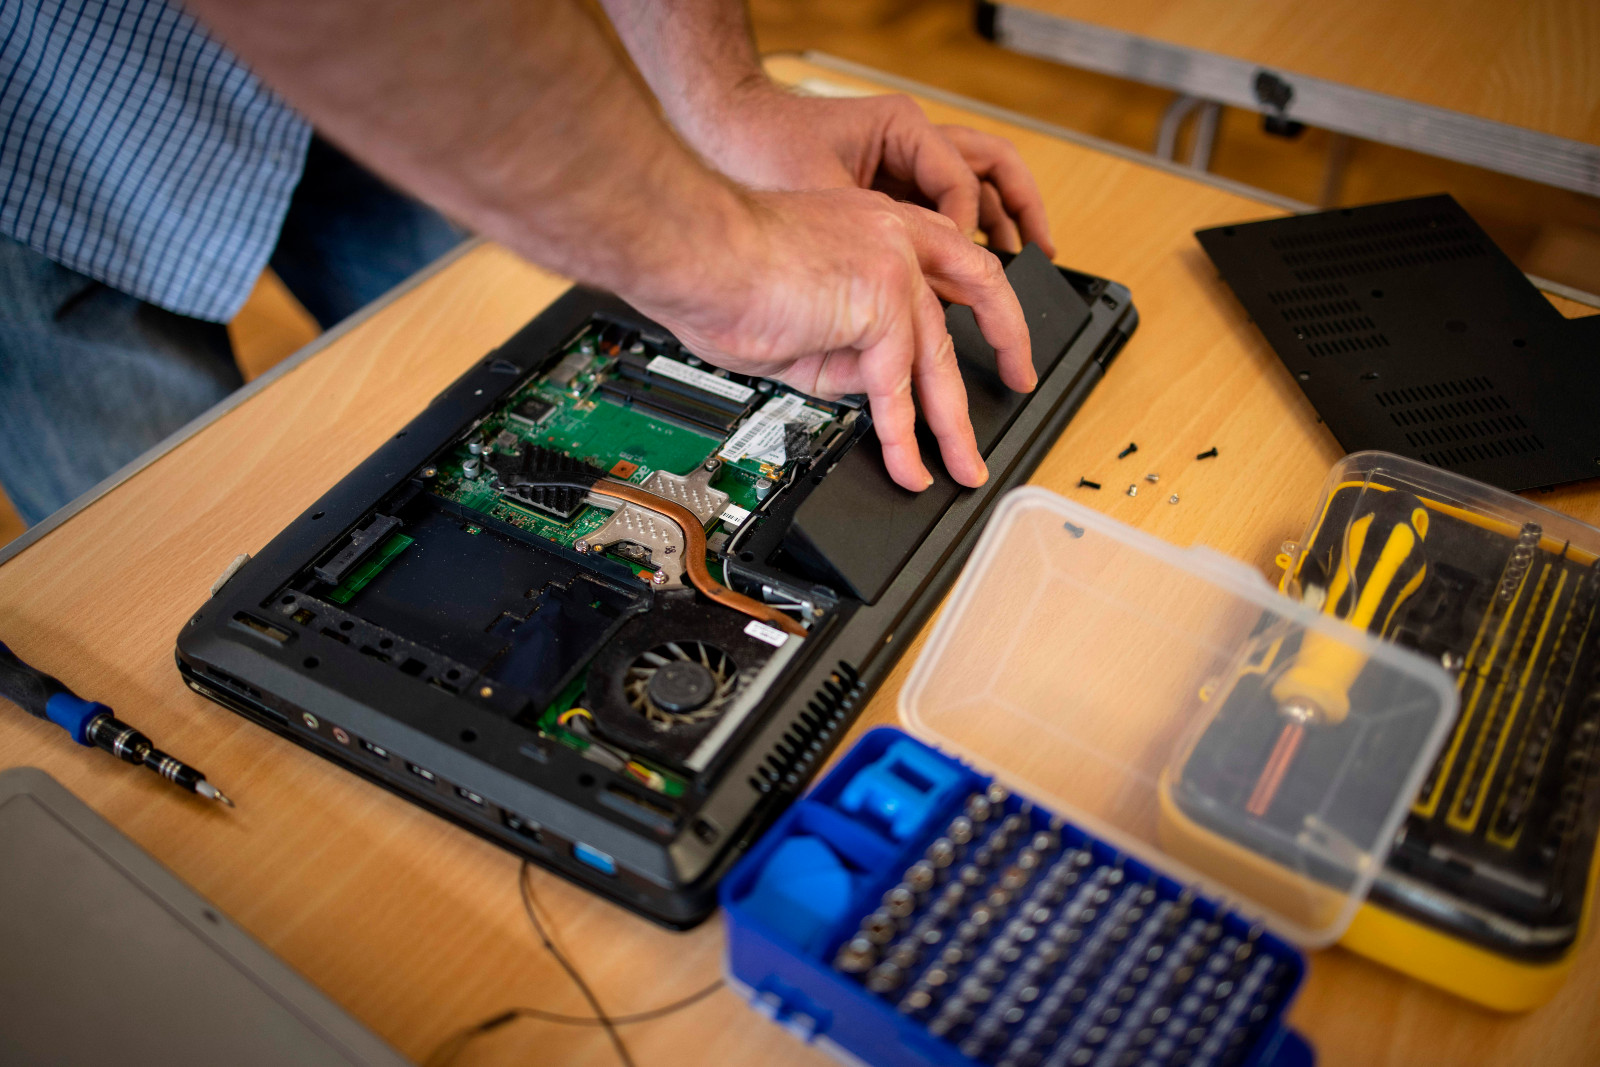 Damian Griffiths, director of Catbytes, a computer repair charity, repairs a donated computer at Ewart Community Hall in south London on February 15, 2021.